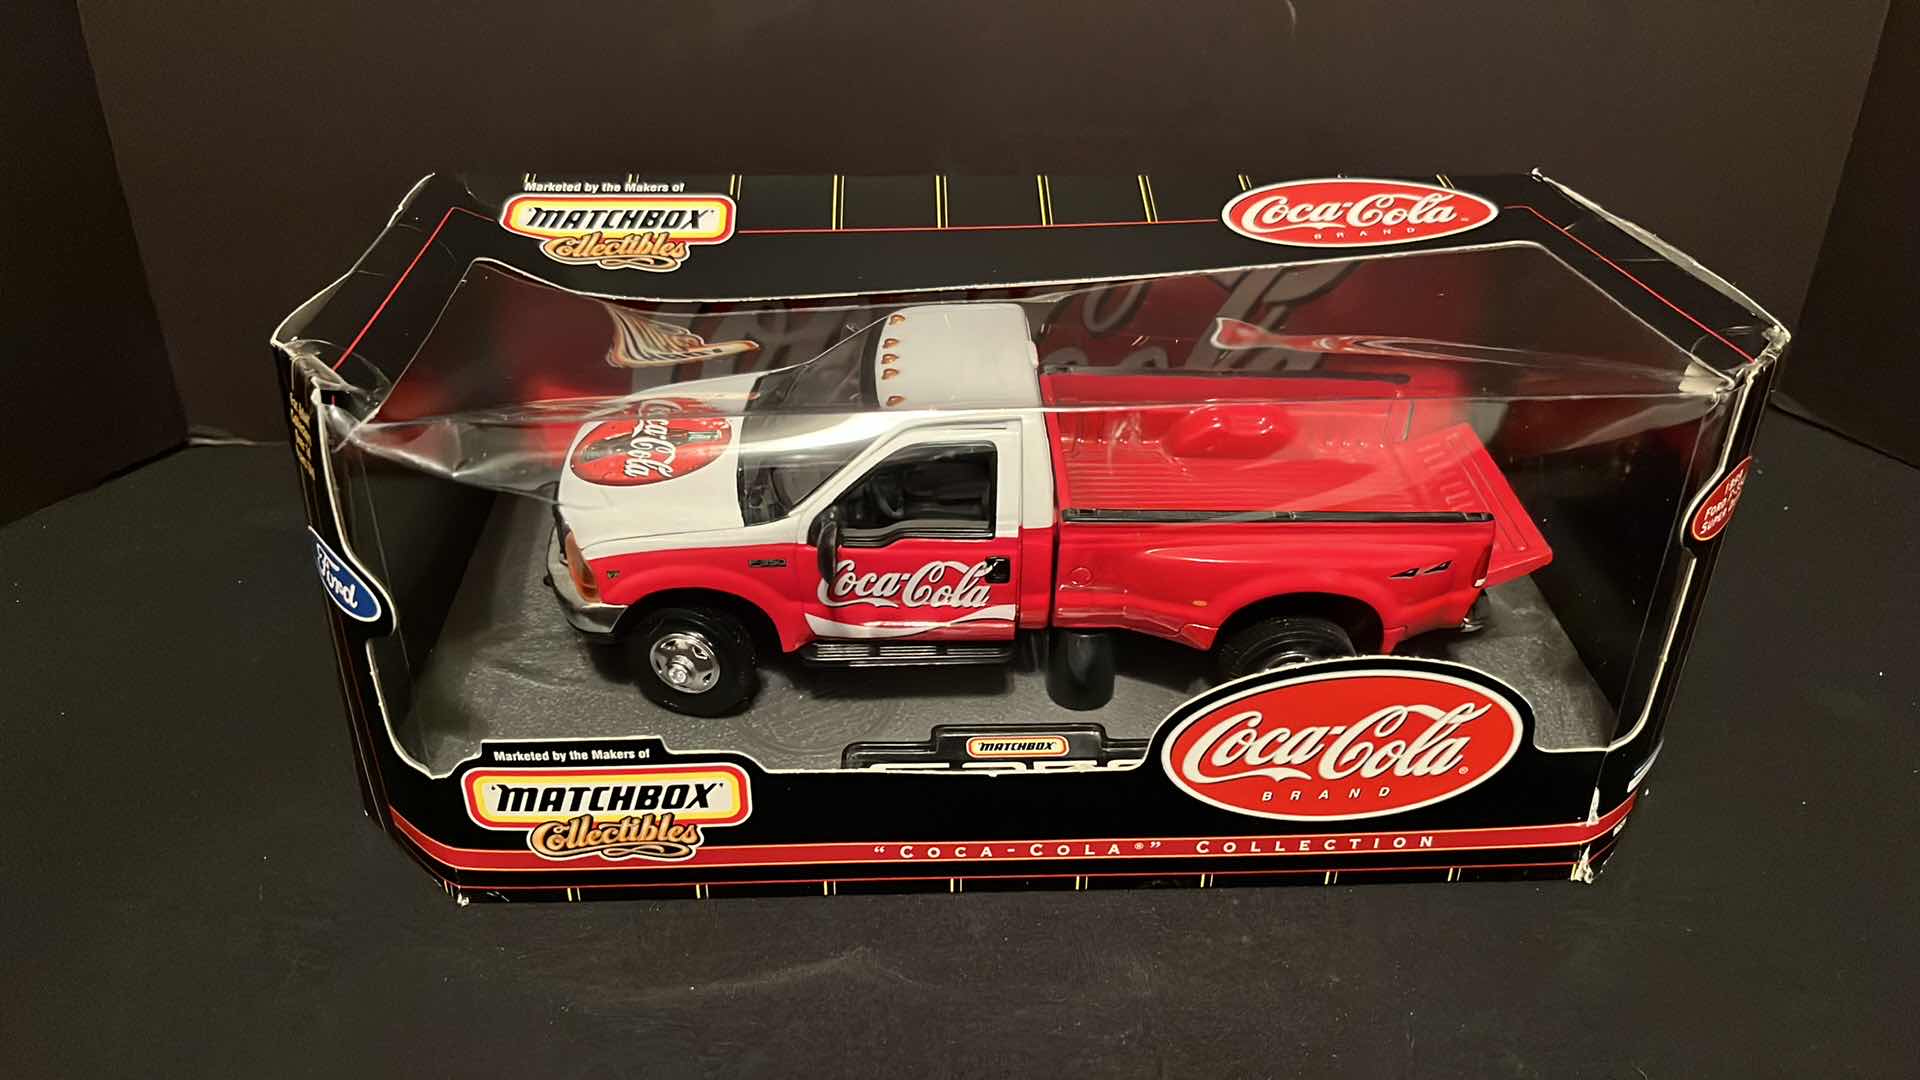 Photo 2 of MATCHBOX COLLECTIBLES COCA-COLA COLLECTION DIE-CAST METAL 1999 GORD F-350 SUPER DUTY PICK UP TRUCK, 1999